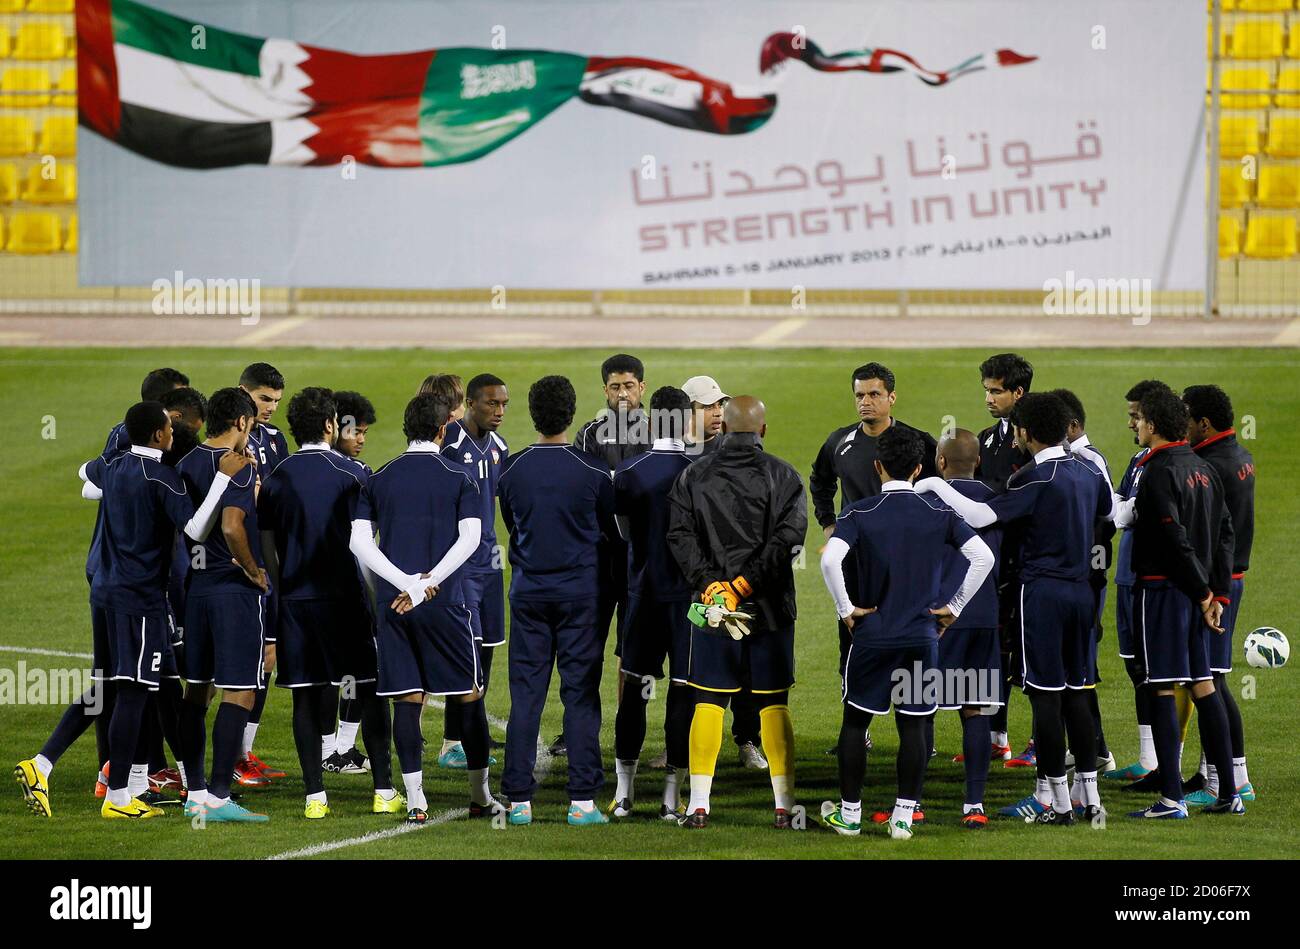 Mahdi Ali (C), coach of United Arab Emirates, speaks to his players during  a training session at Al-Ahli Sports Club in Manama January 4, 2013. UAE  will play against Qatar during the